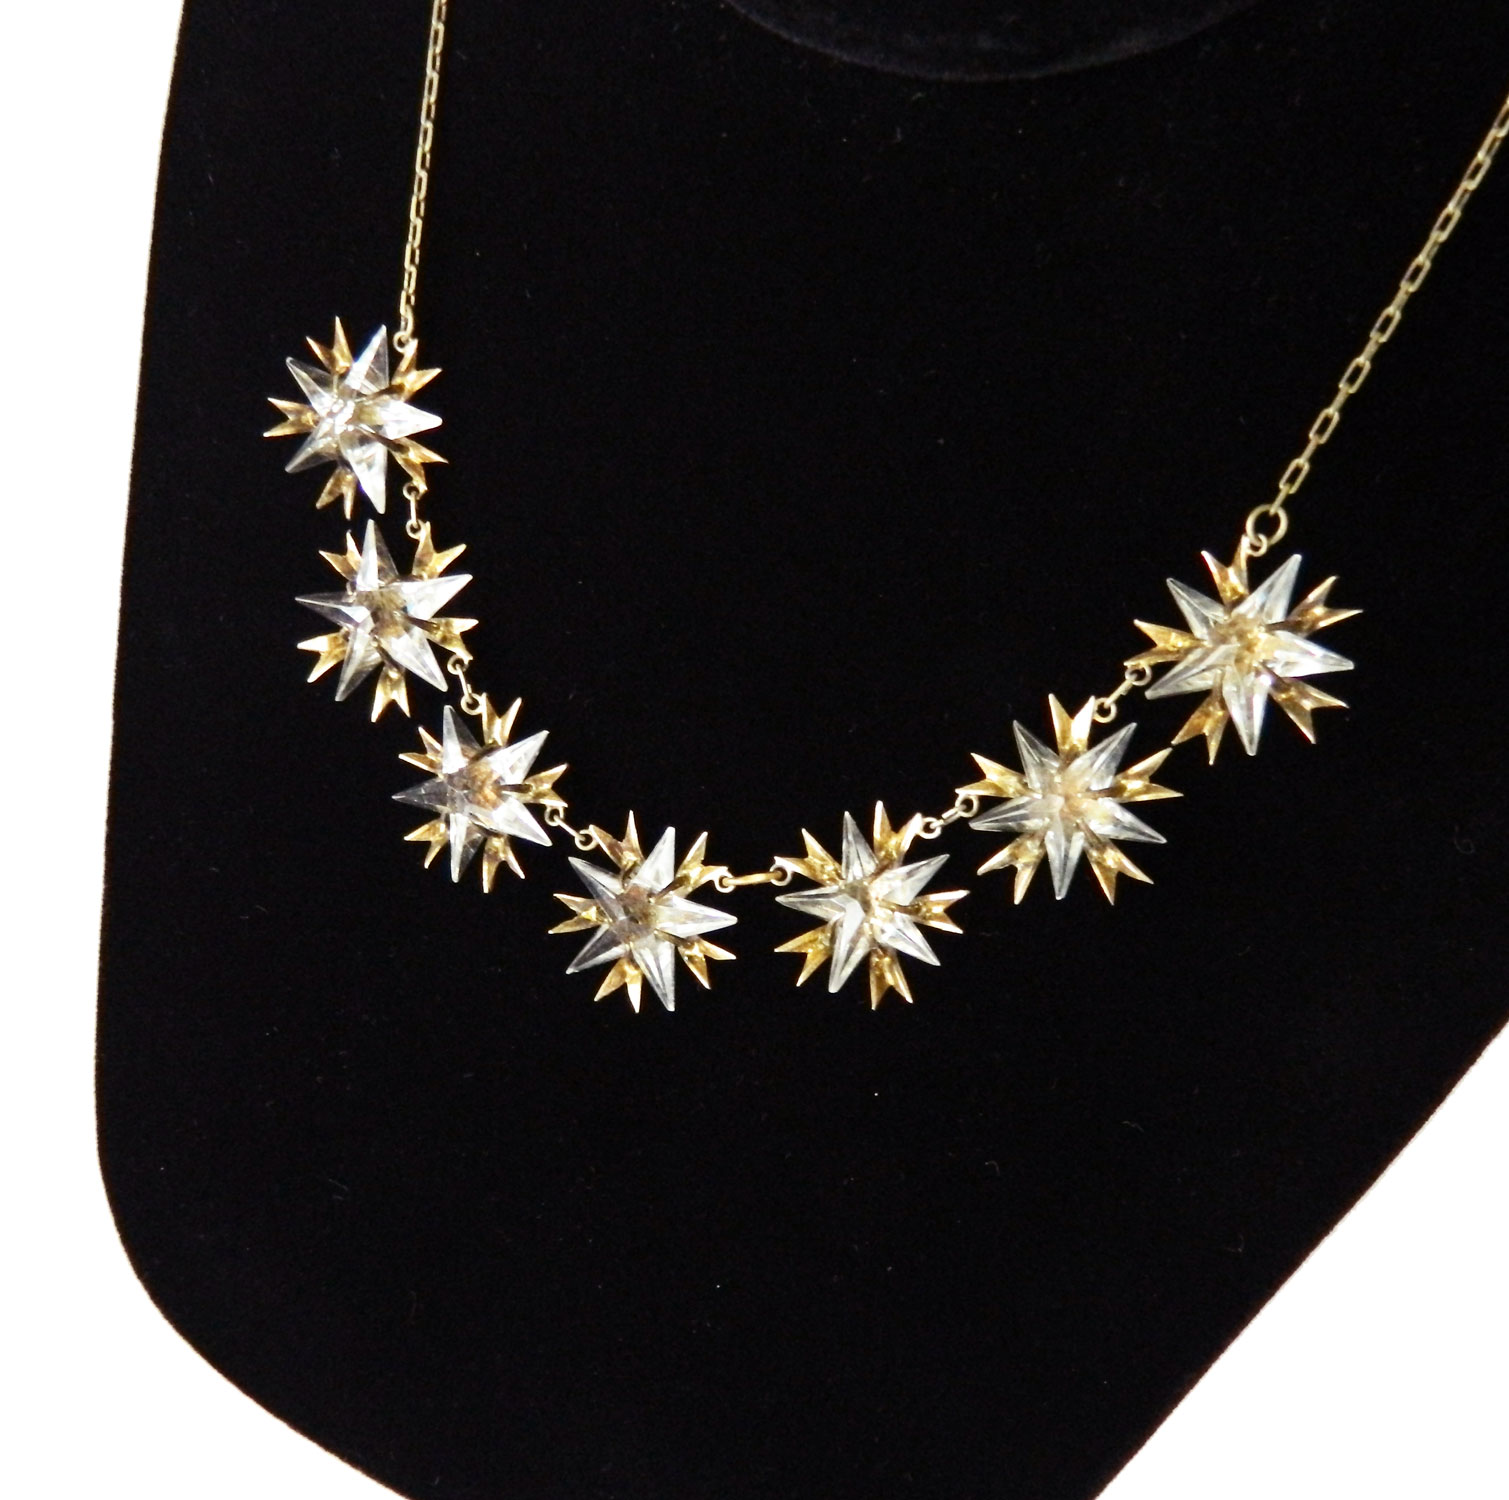 Crystal star necklace